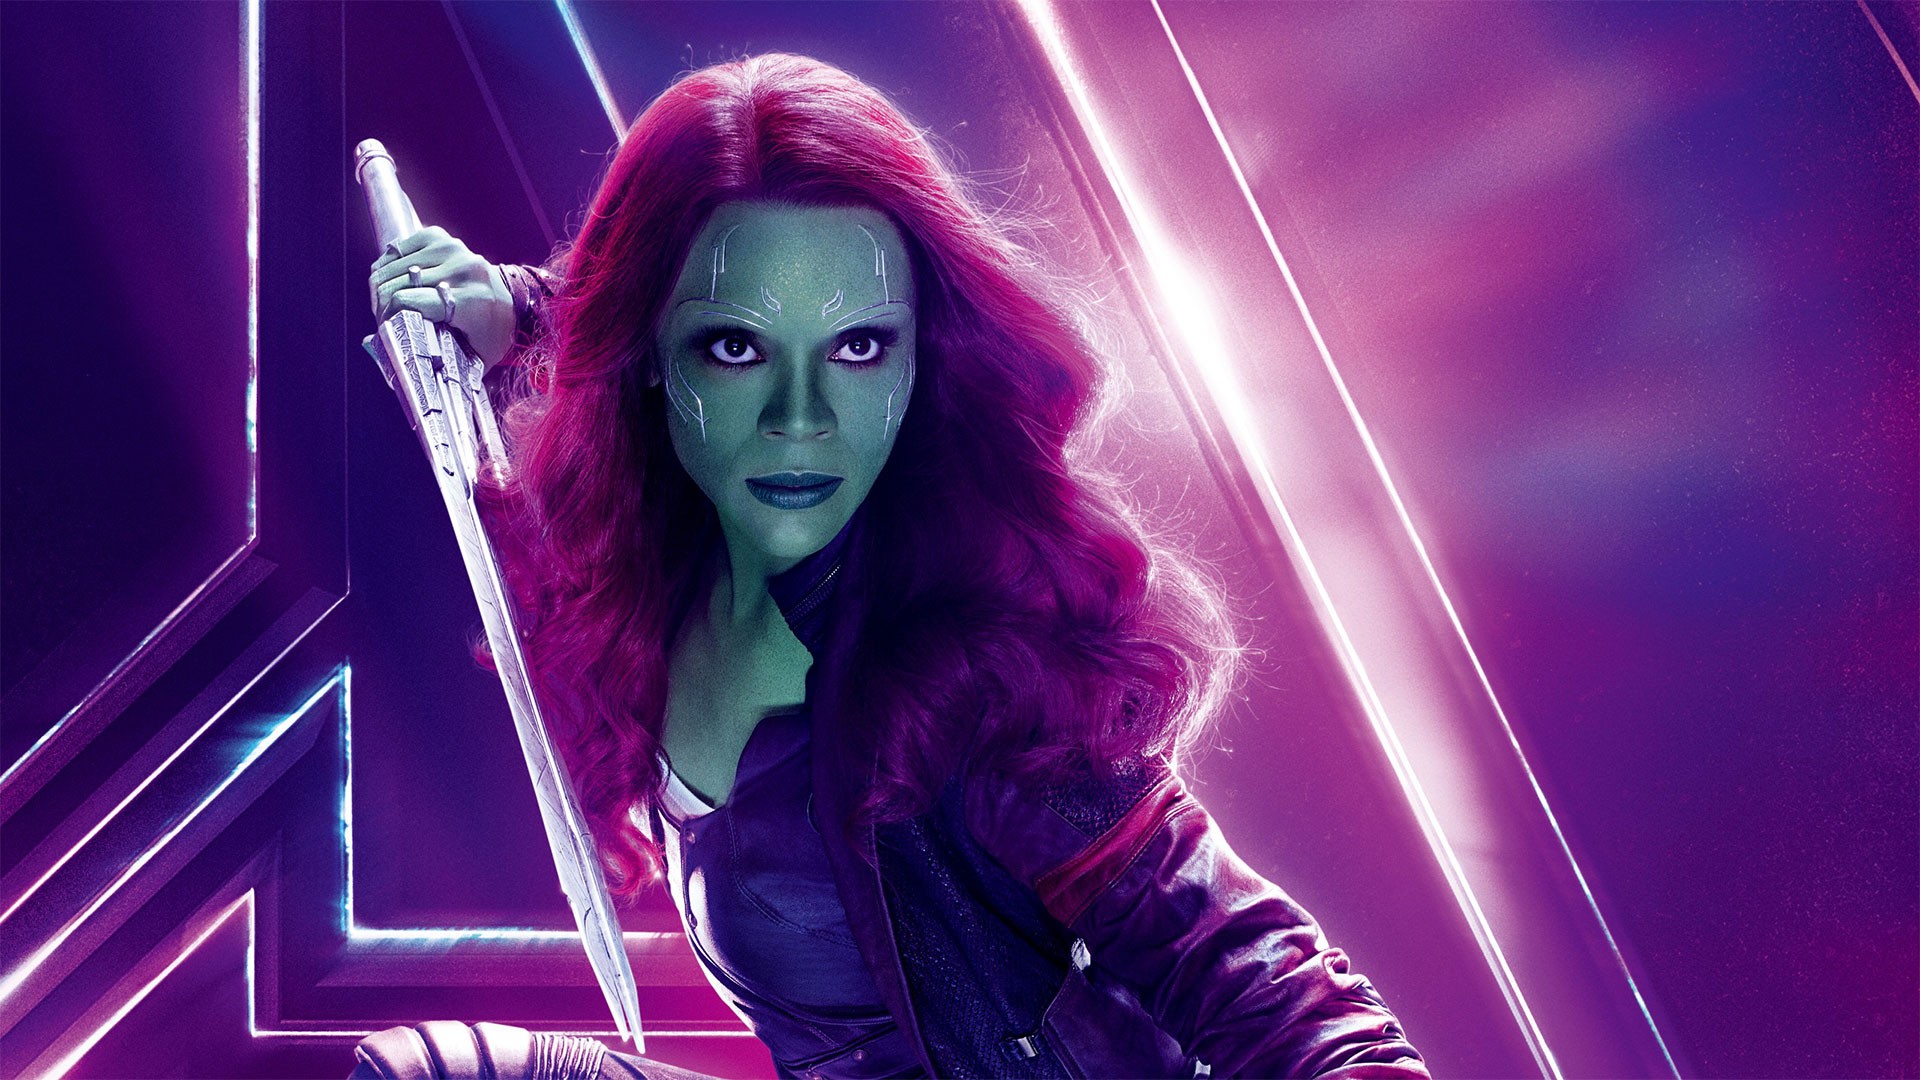 Zoe Saldana Gamora Avengers Endgame Wallpaper HD with high-resolution 1920x1080 pixel. You can use this poster wallpaper for your Desktop Computers, Mac Screensavers, Windows Backgrounds, iPhone Wallpapers, Tablet or Android Lock screen and another Mobile device